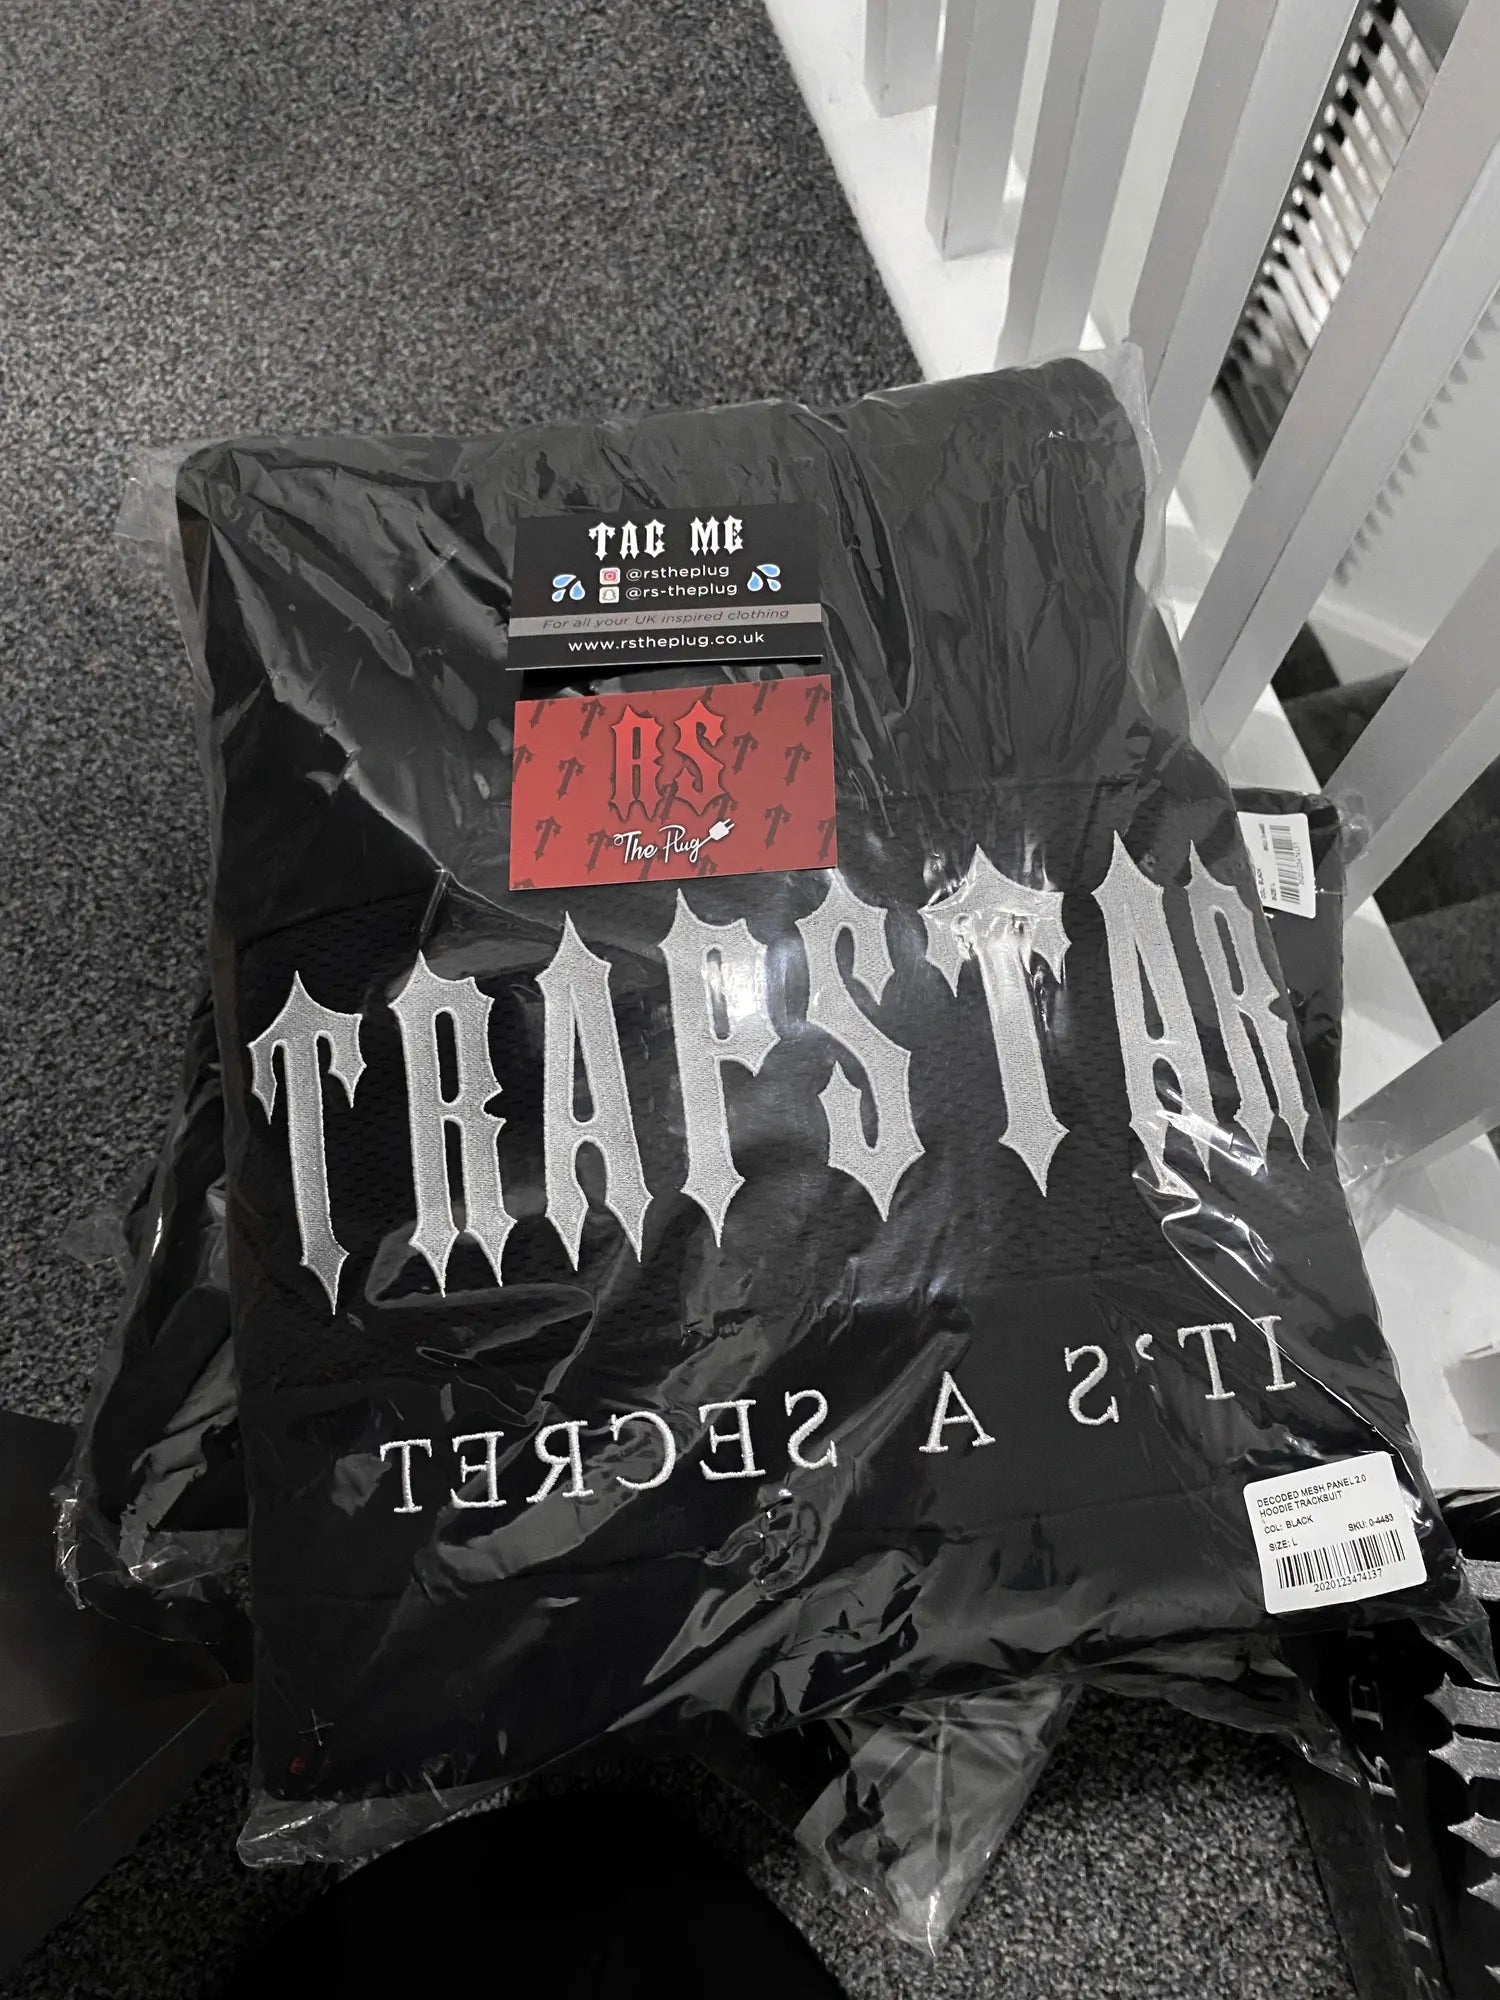 Trapstar Decoded Mesh Tracksuit Black